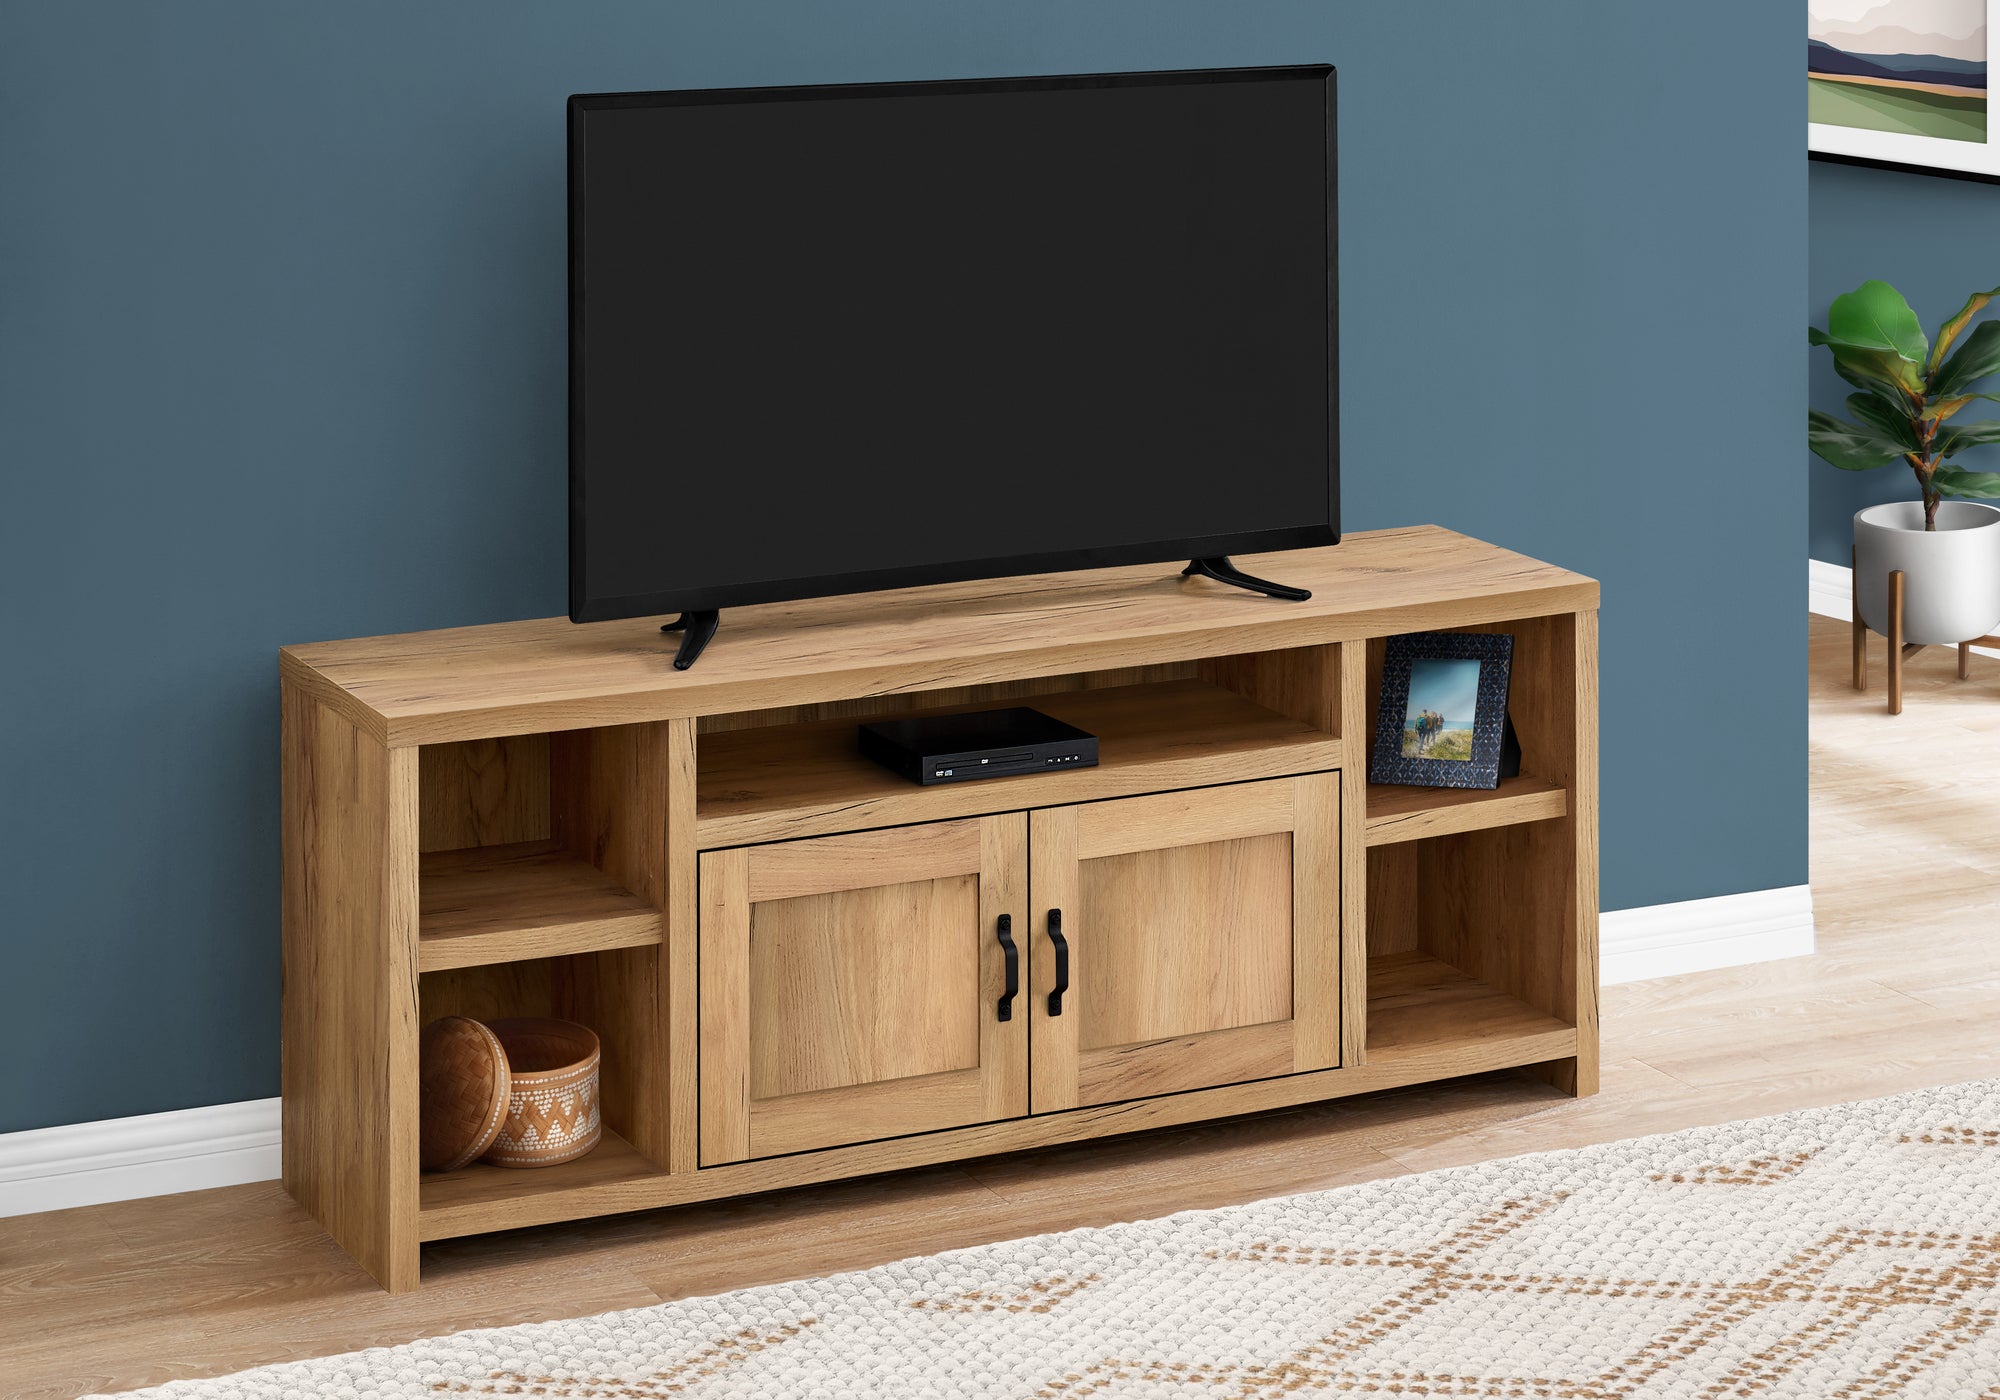 I 2744 - TV STAND - 60"L / GOLDEN PINE RECLAIMED WOOD-LOOK BY MONARCH SPECIALTIES INC